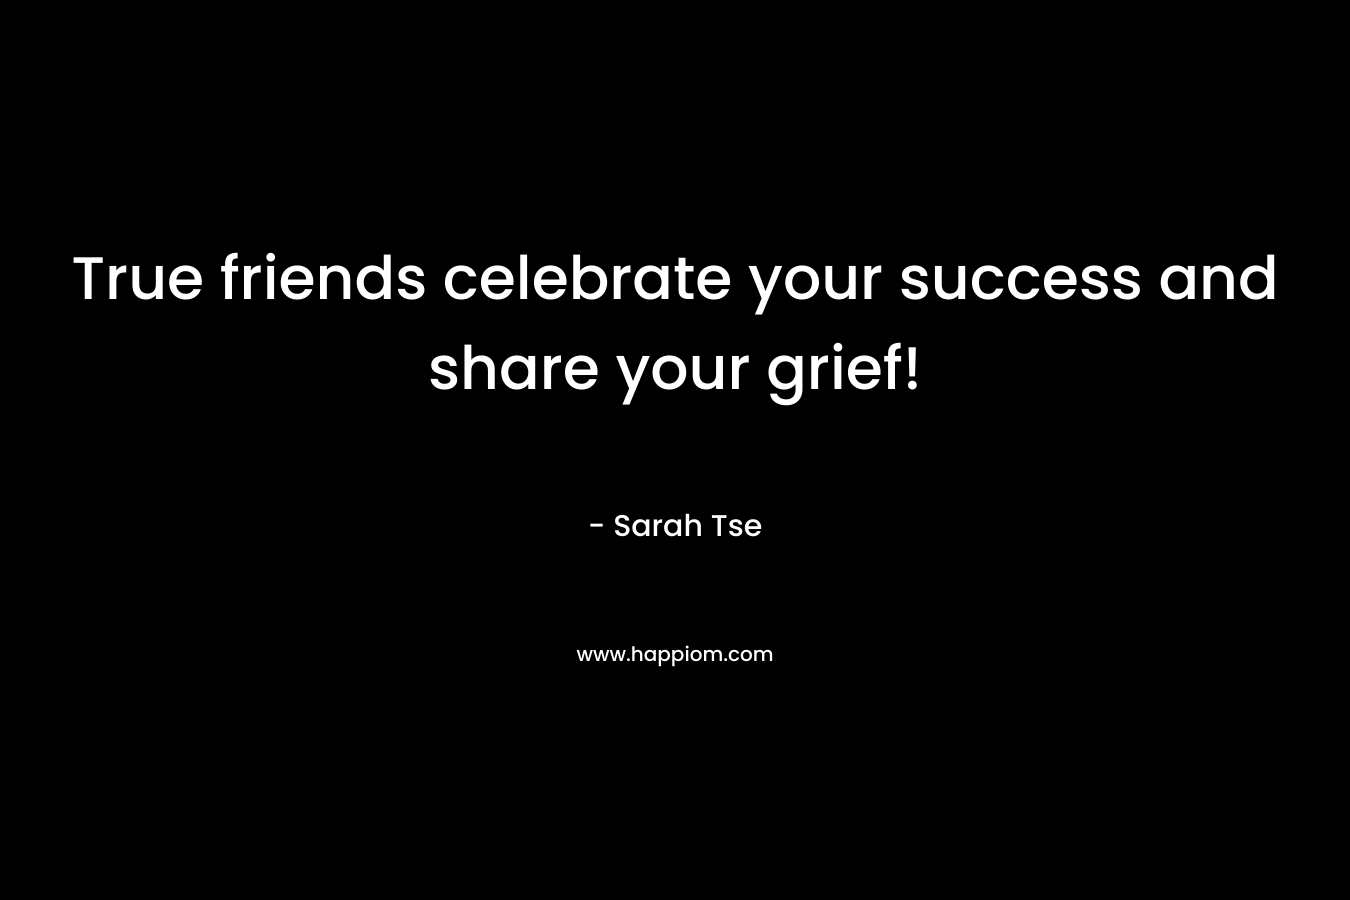 True friends celebrate your success and share your grief! – Sarah Tse